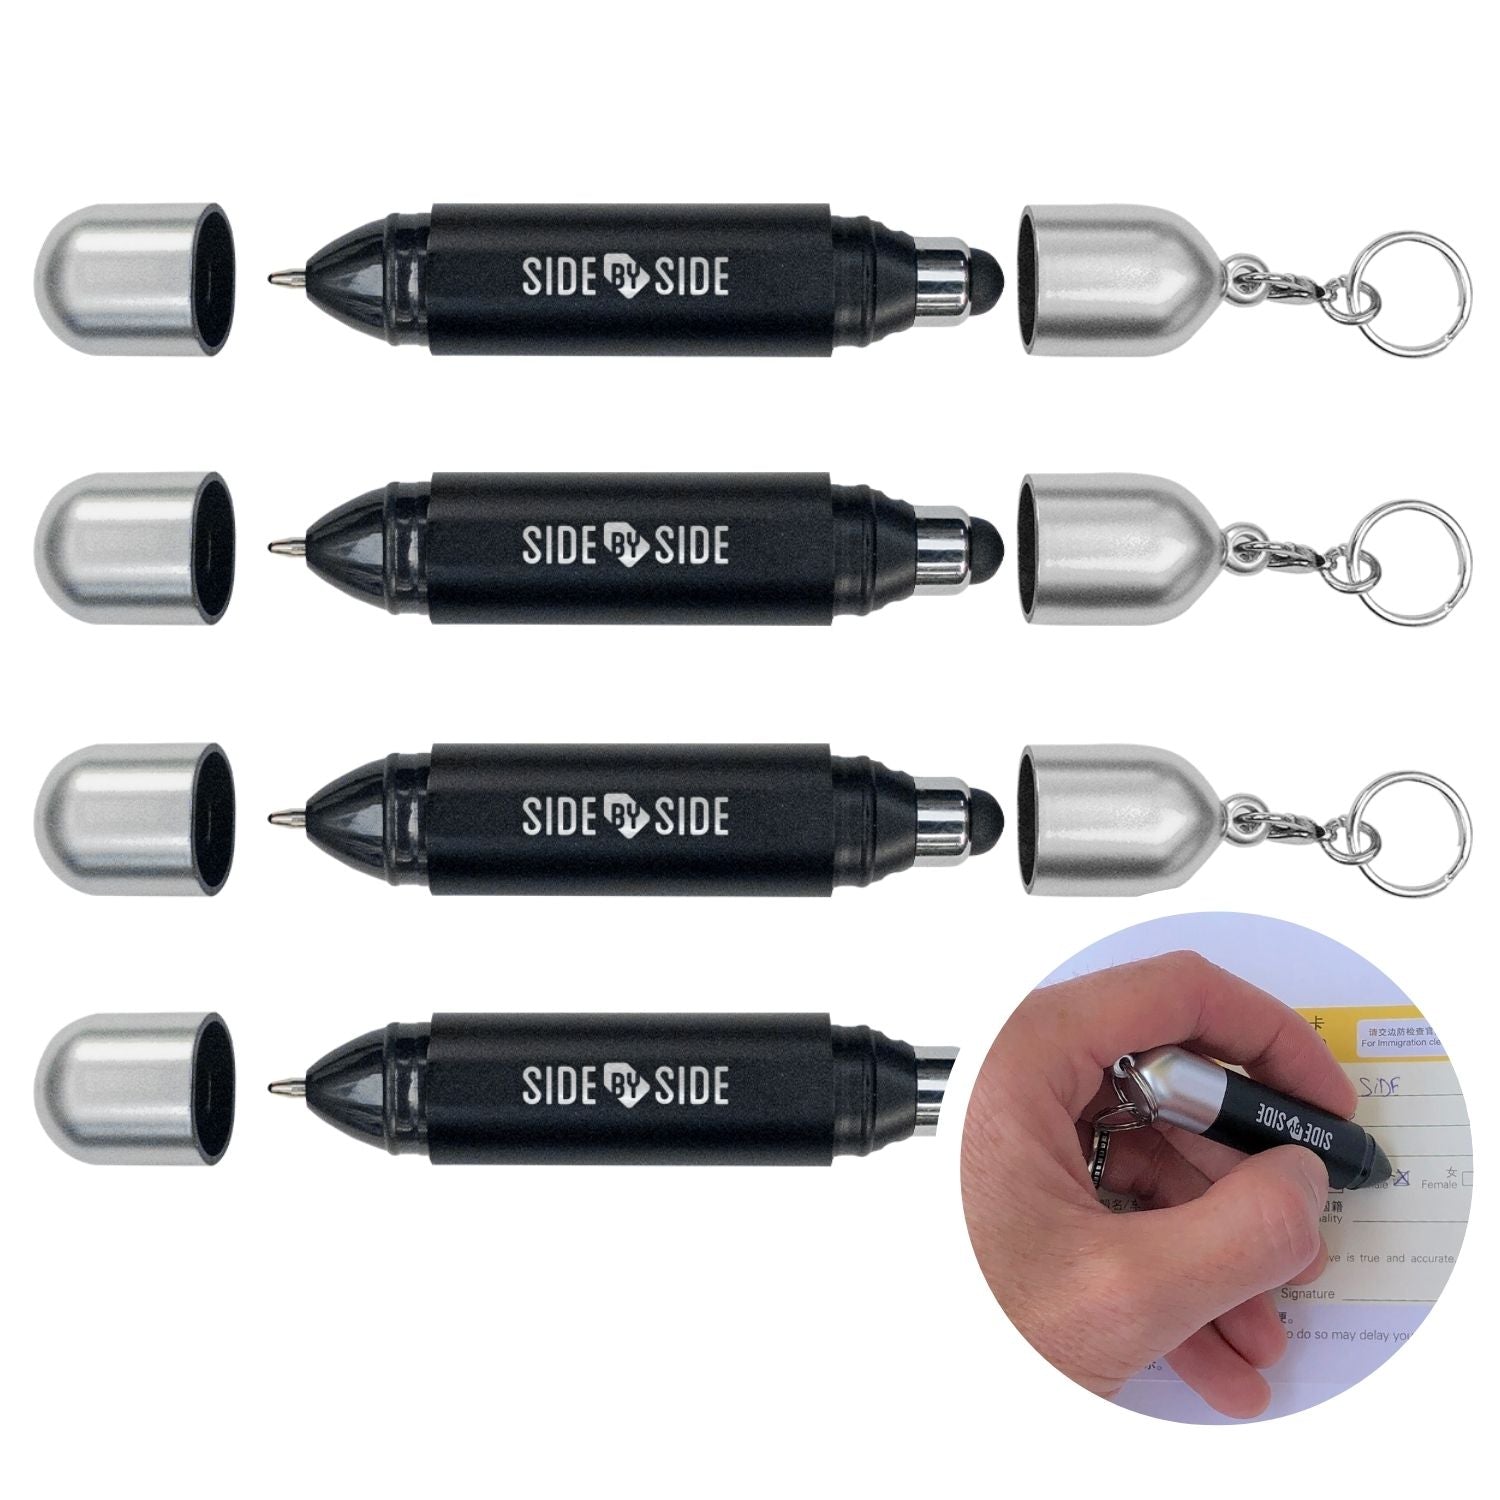 TRAVEL PEN KEYCHAIN (Pack of 4x) – SIDE BY SIDE